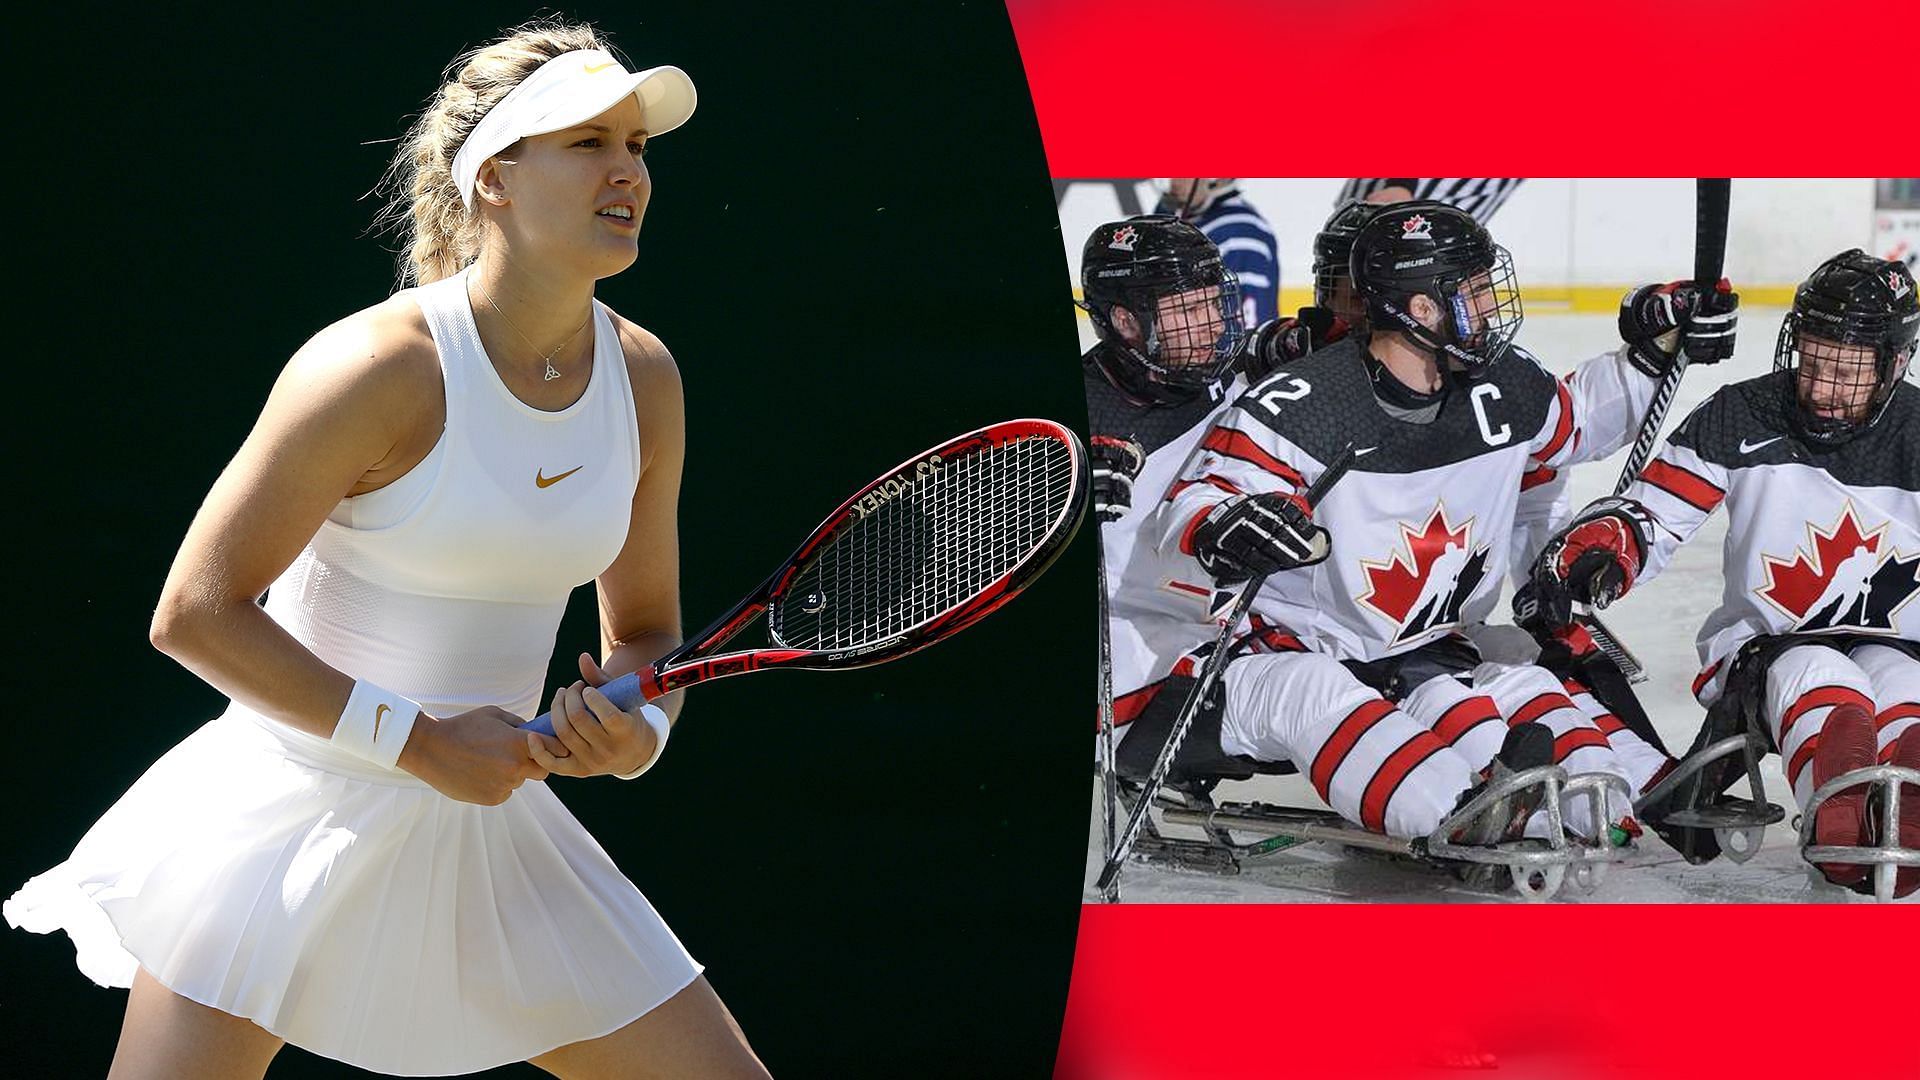 Eugenie Bouchard met with the silver medal winning Canada